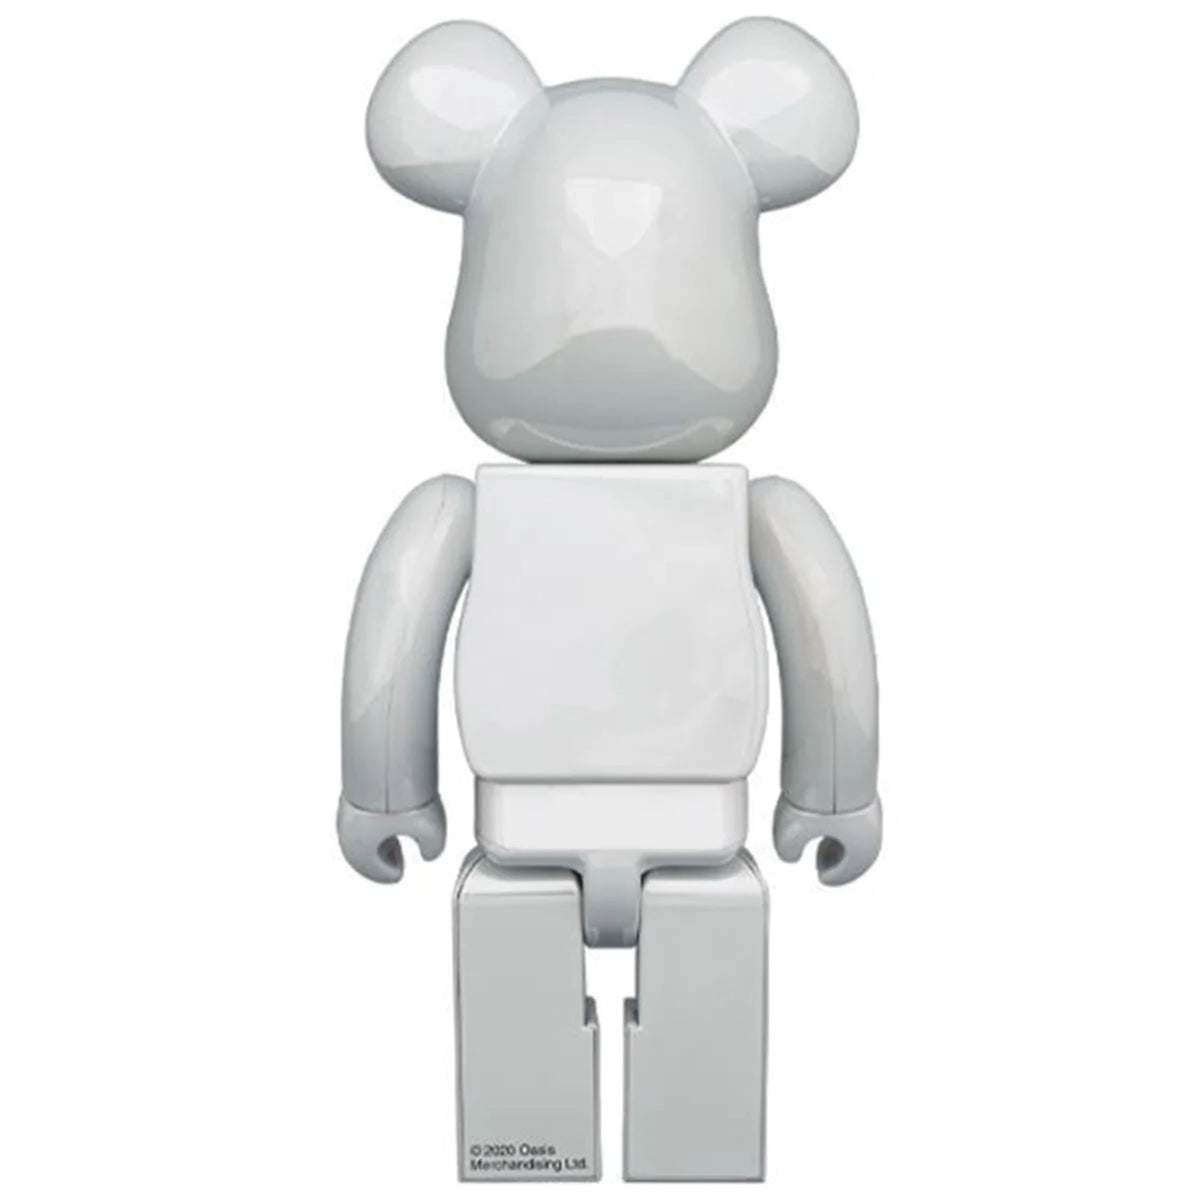 Shop Bearbricks Toys with great discounts and prices online - Oct